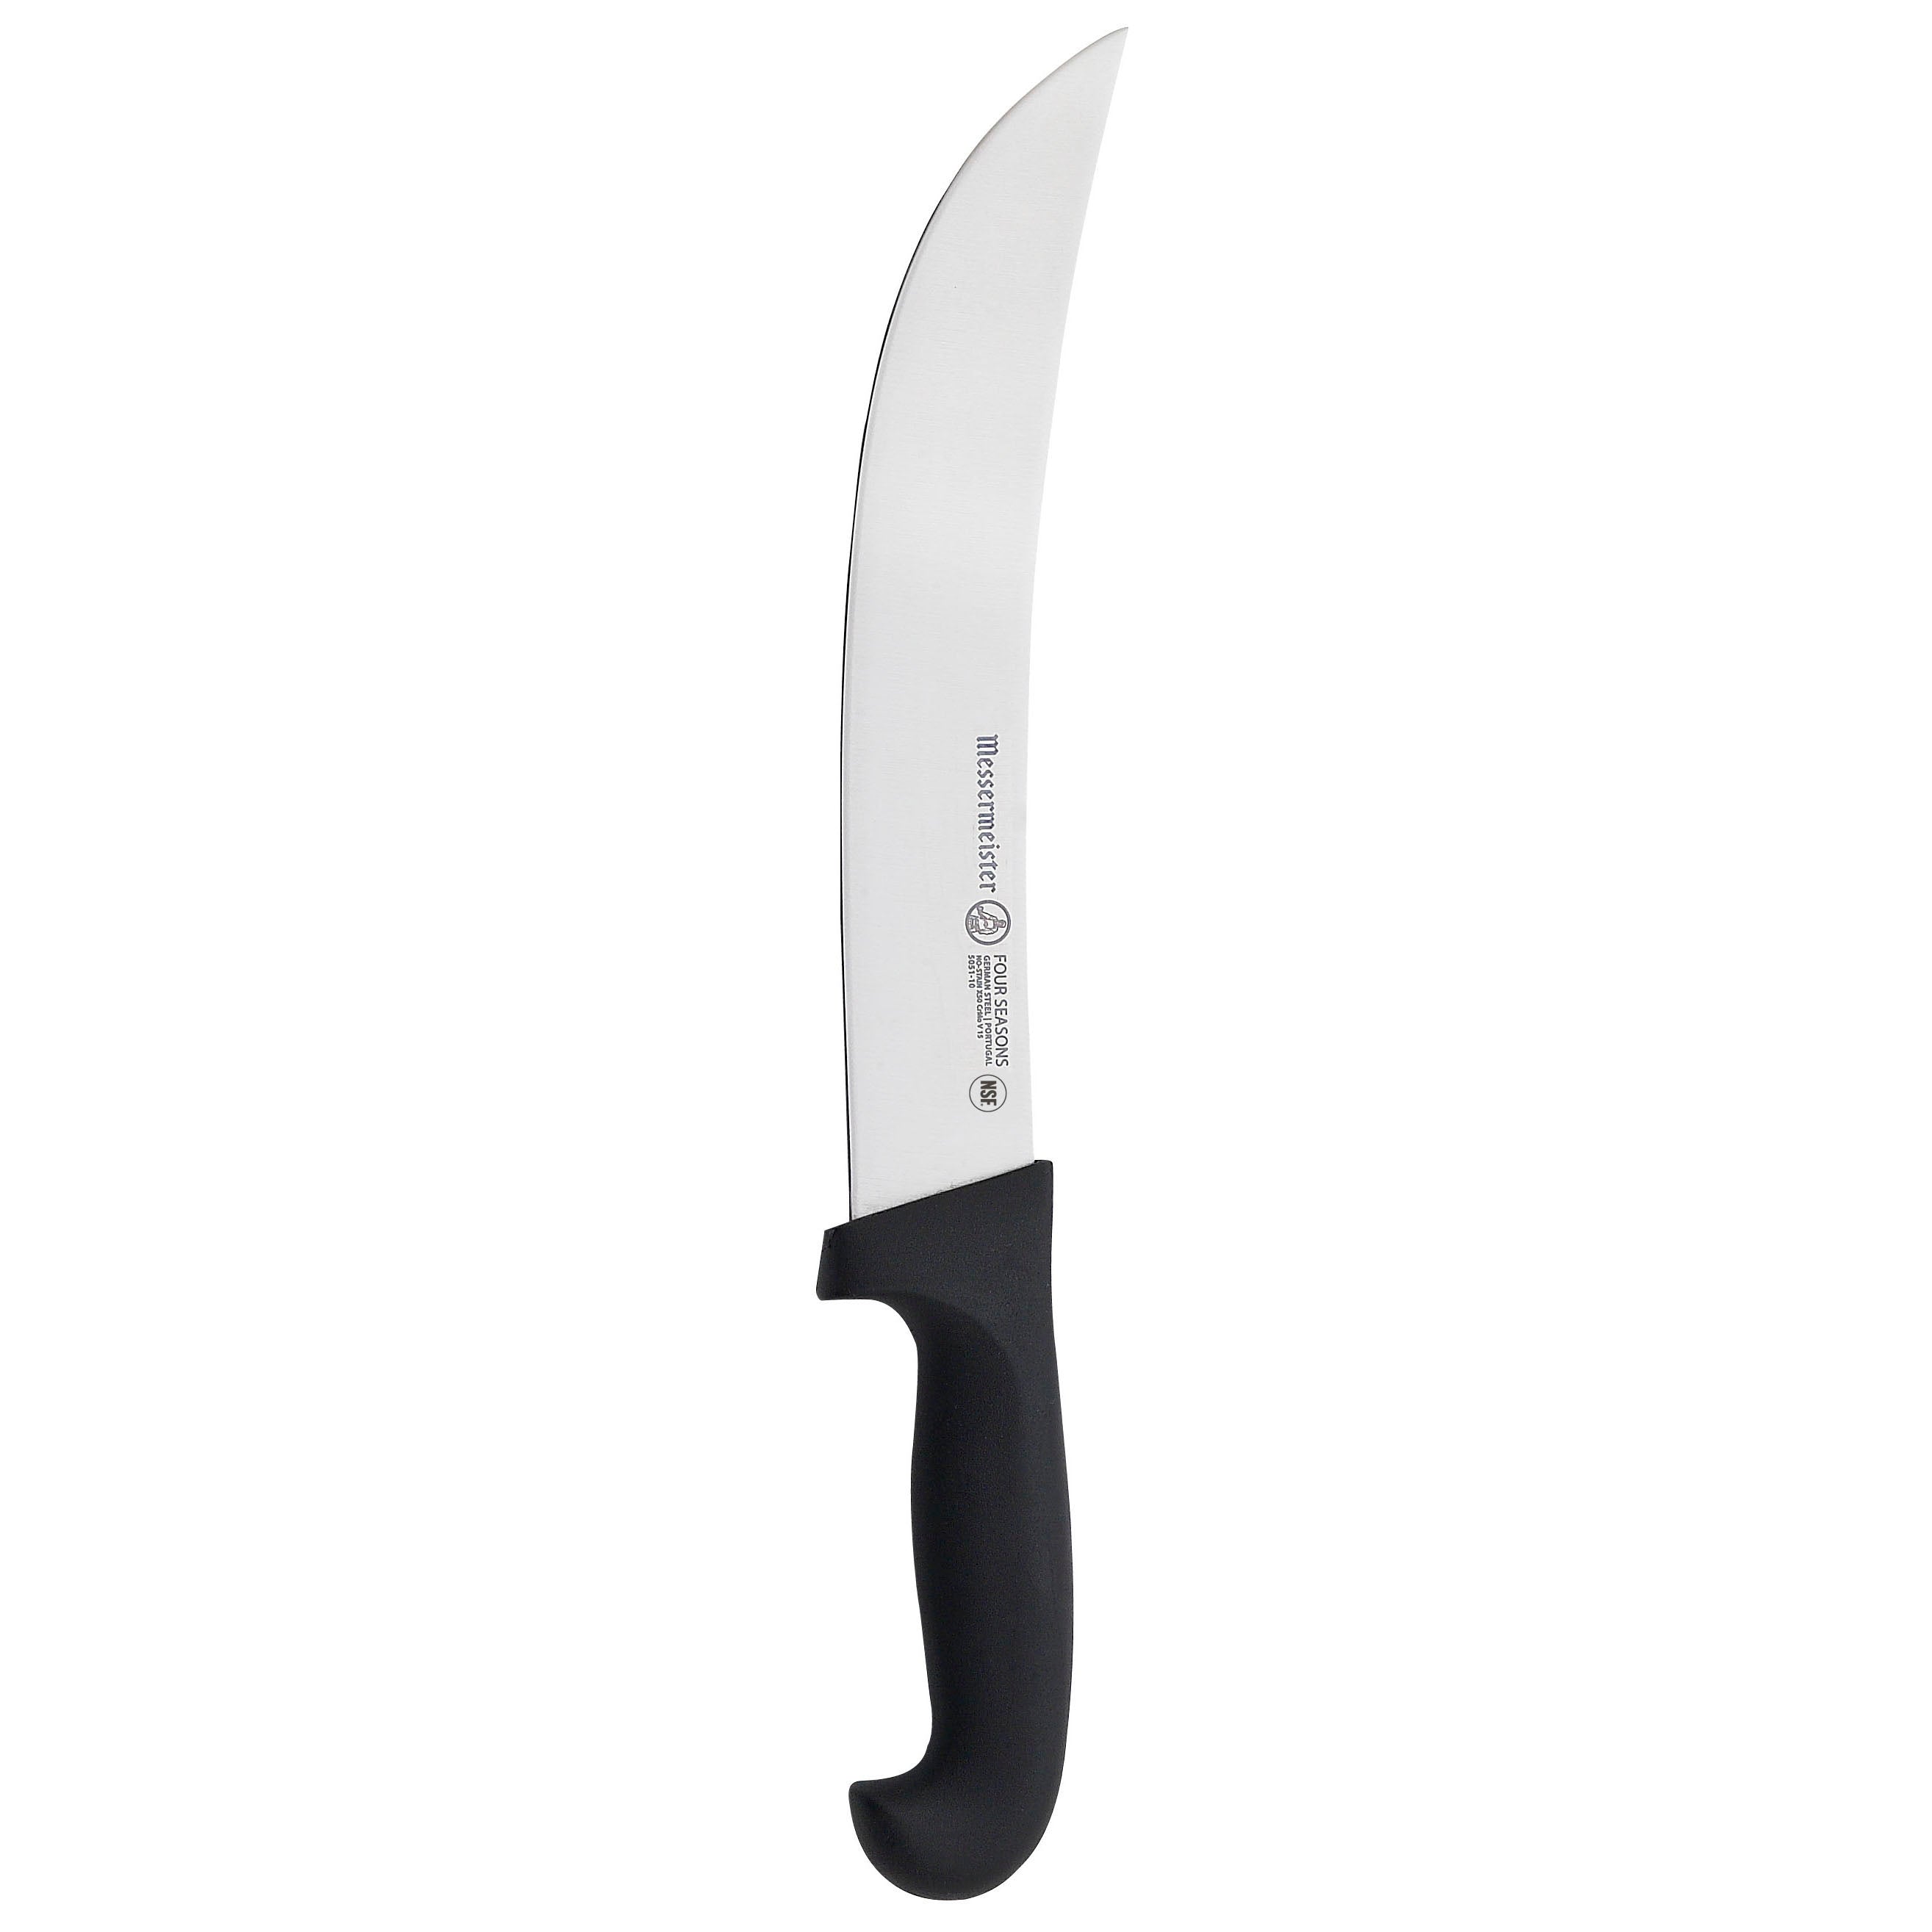 A knife is the most important tool in the kitchen… But it's gotta be